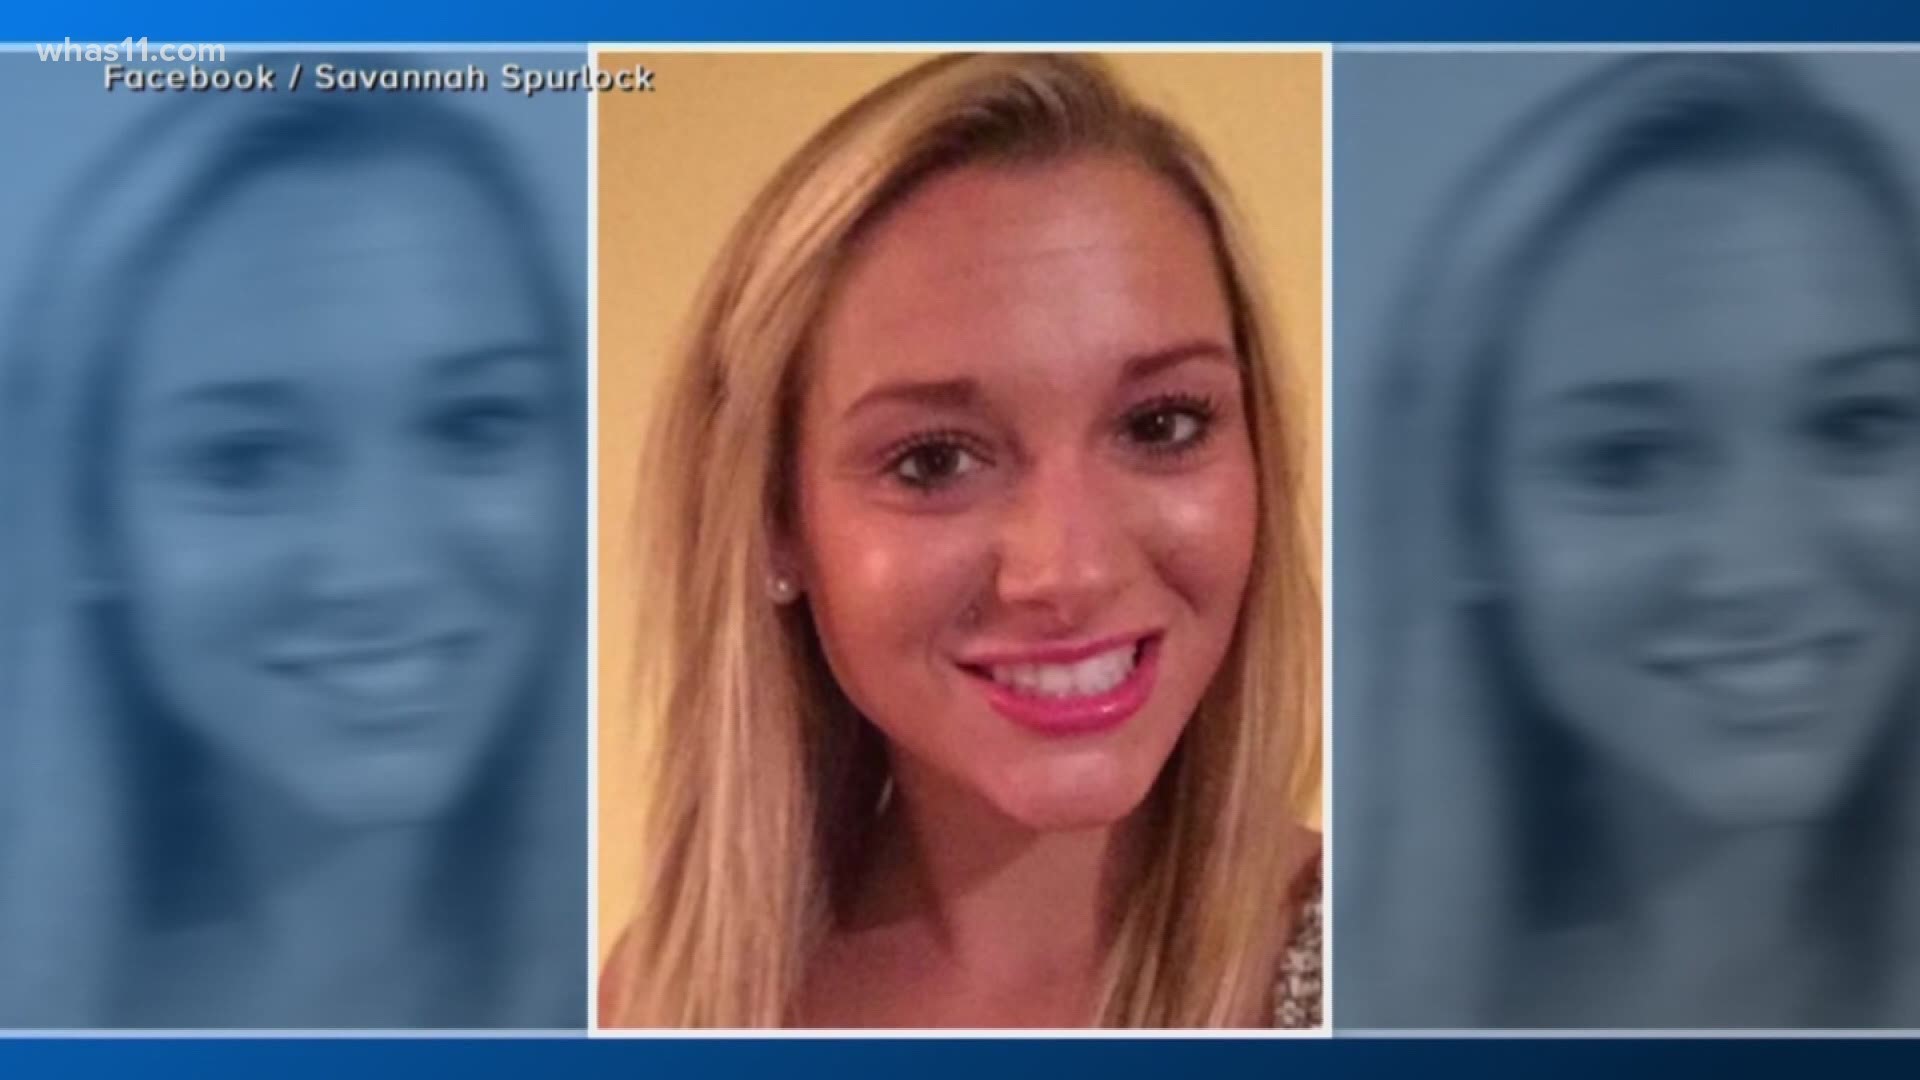 Two years after Savannah Spurlock was last seen alive, a man says he acted alone in murdering the Kentucky mother.